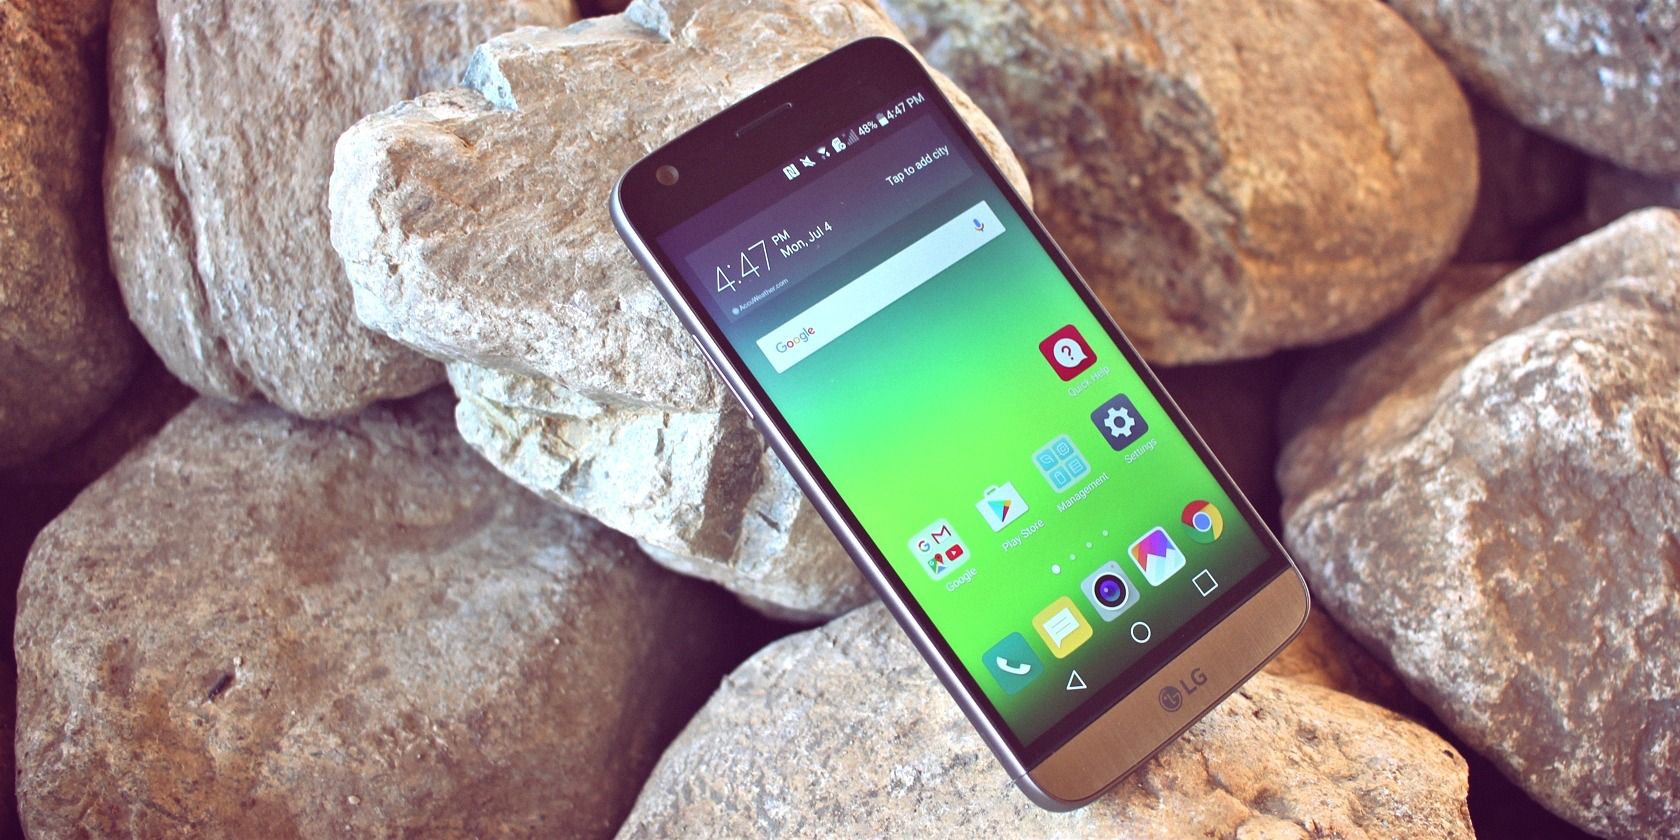 Android phone resting against rocks